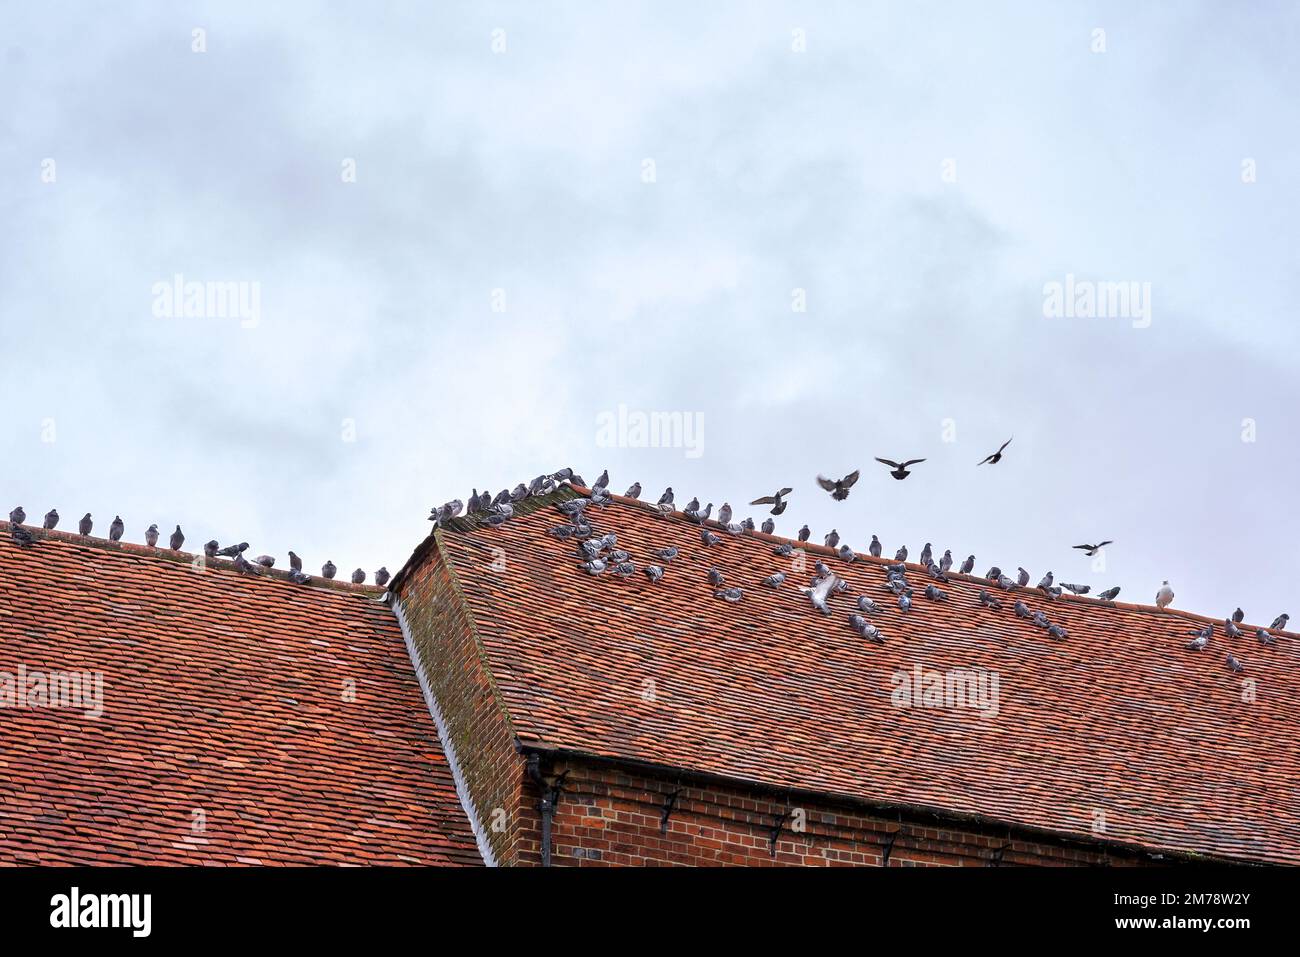 Pigeons sitting and landing on an old clay tiled roof Stock Photo